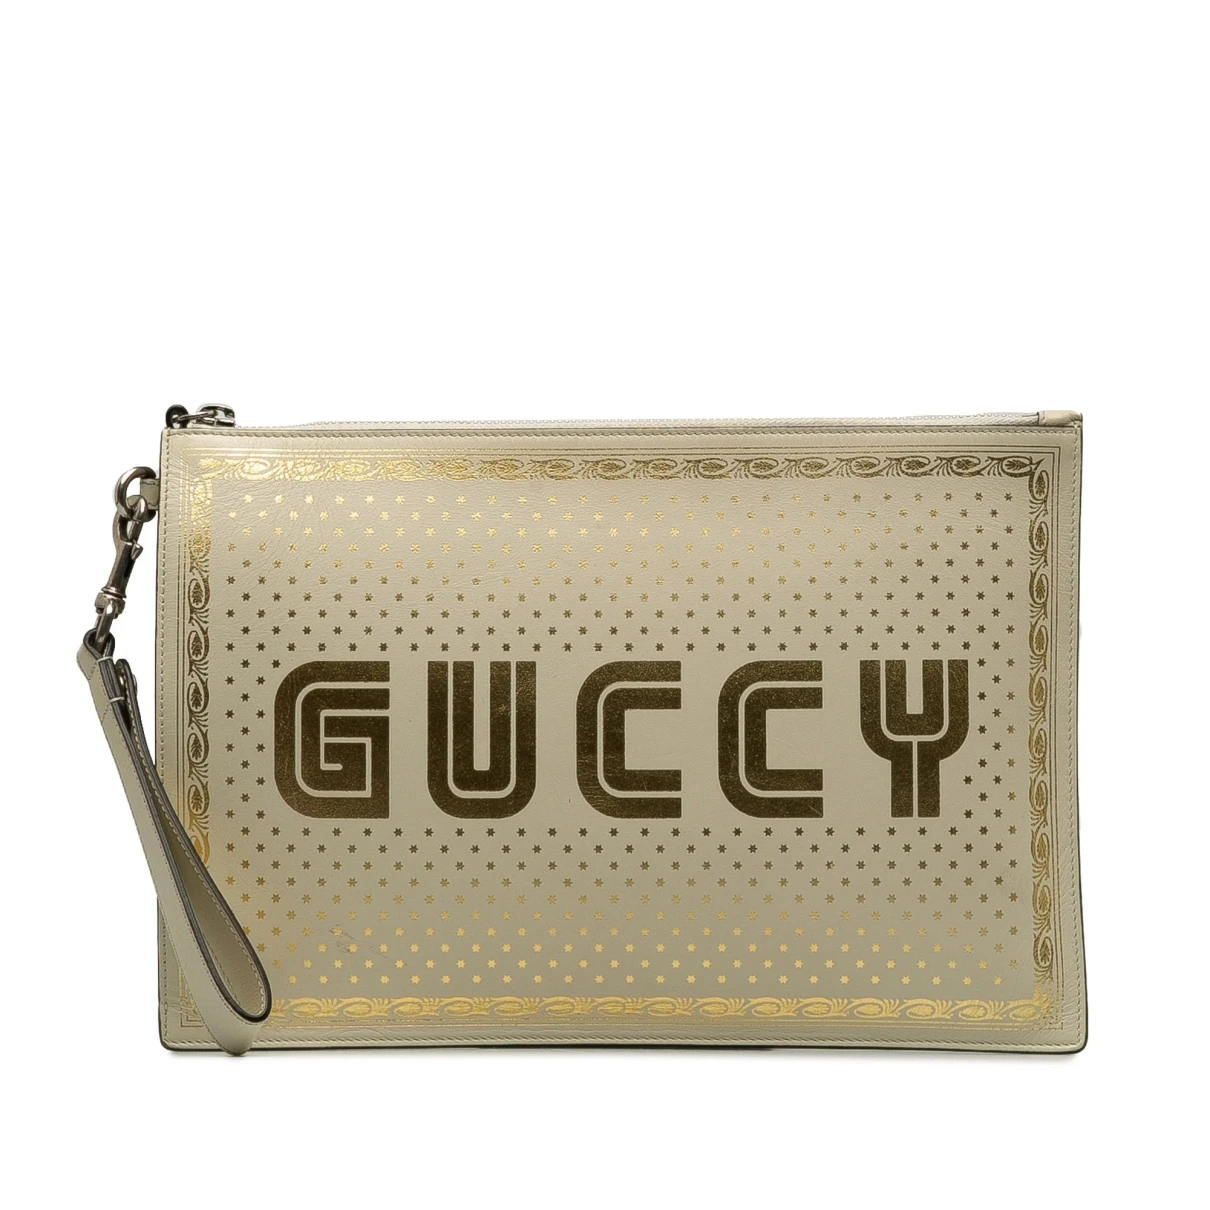 Pre-owned Gucci Leather Clutch Bag In White